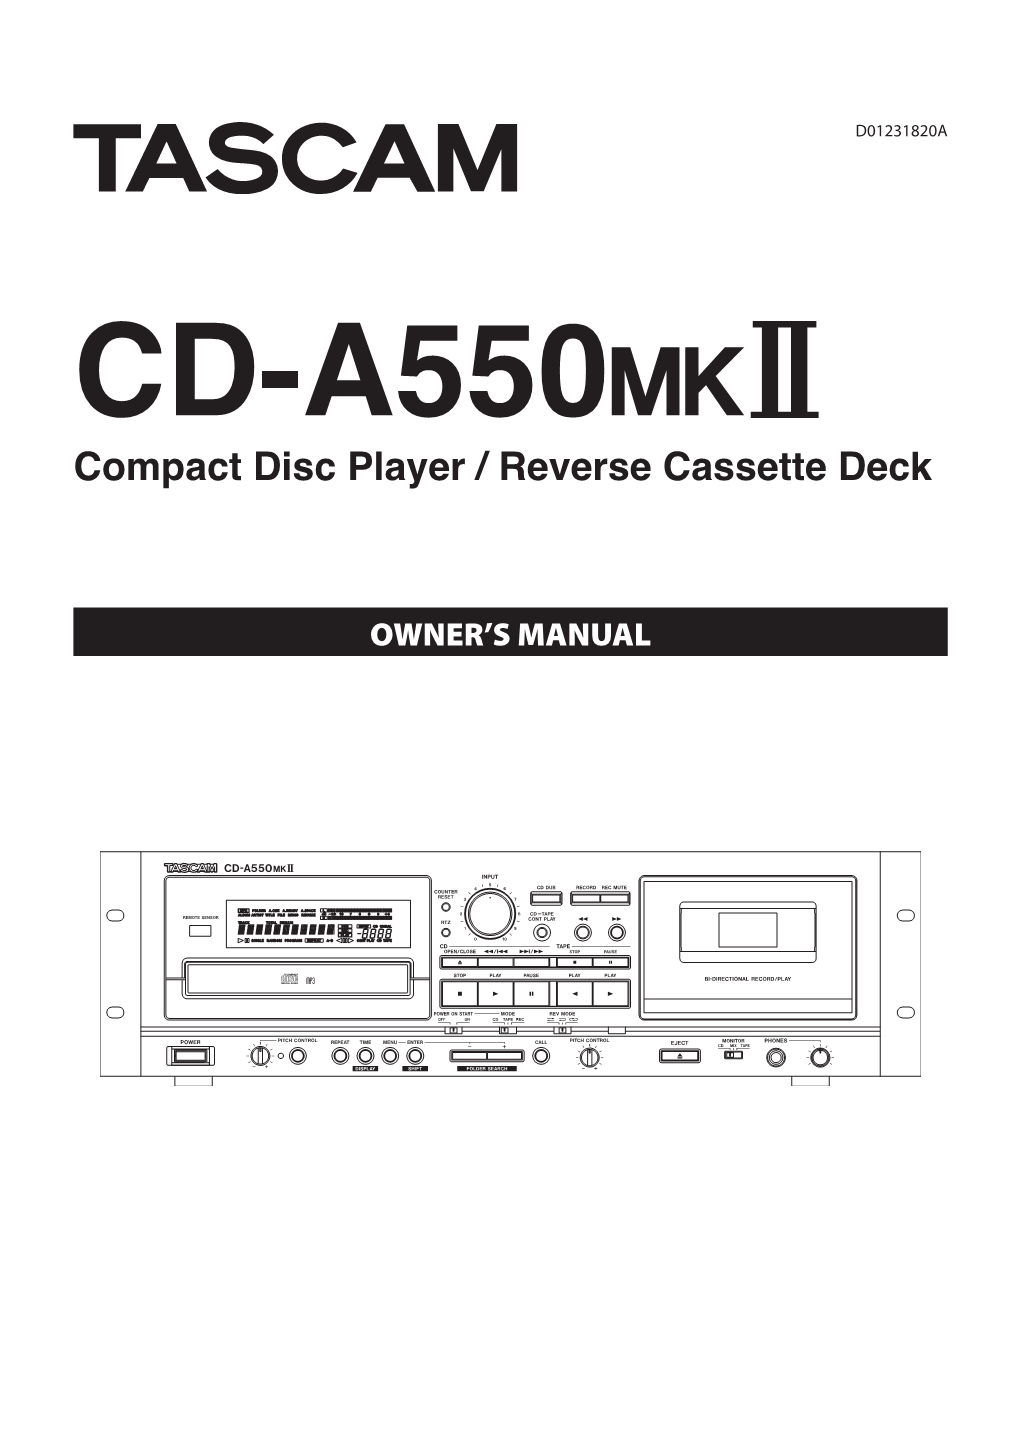 CD-A550MKII Owner's Manual